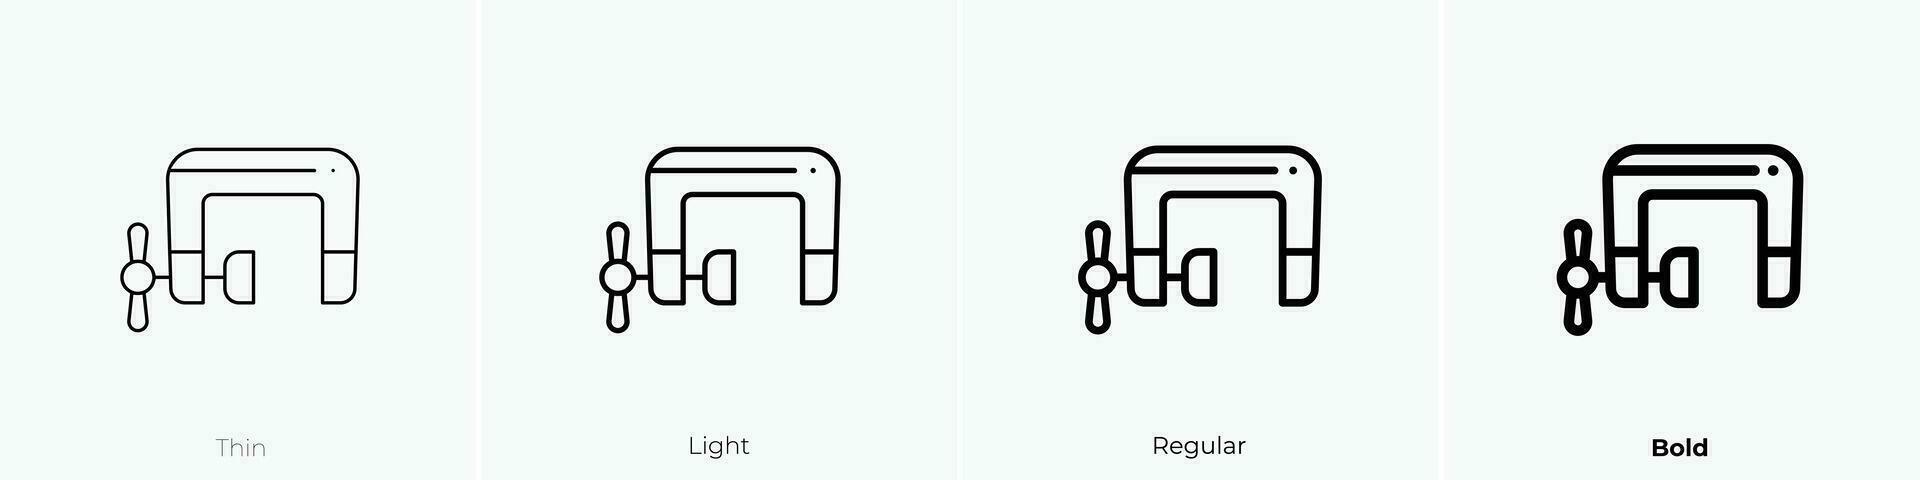 vise icon. Thin, Light, Regular And Bold style design isolated on white background vector